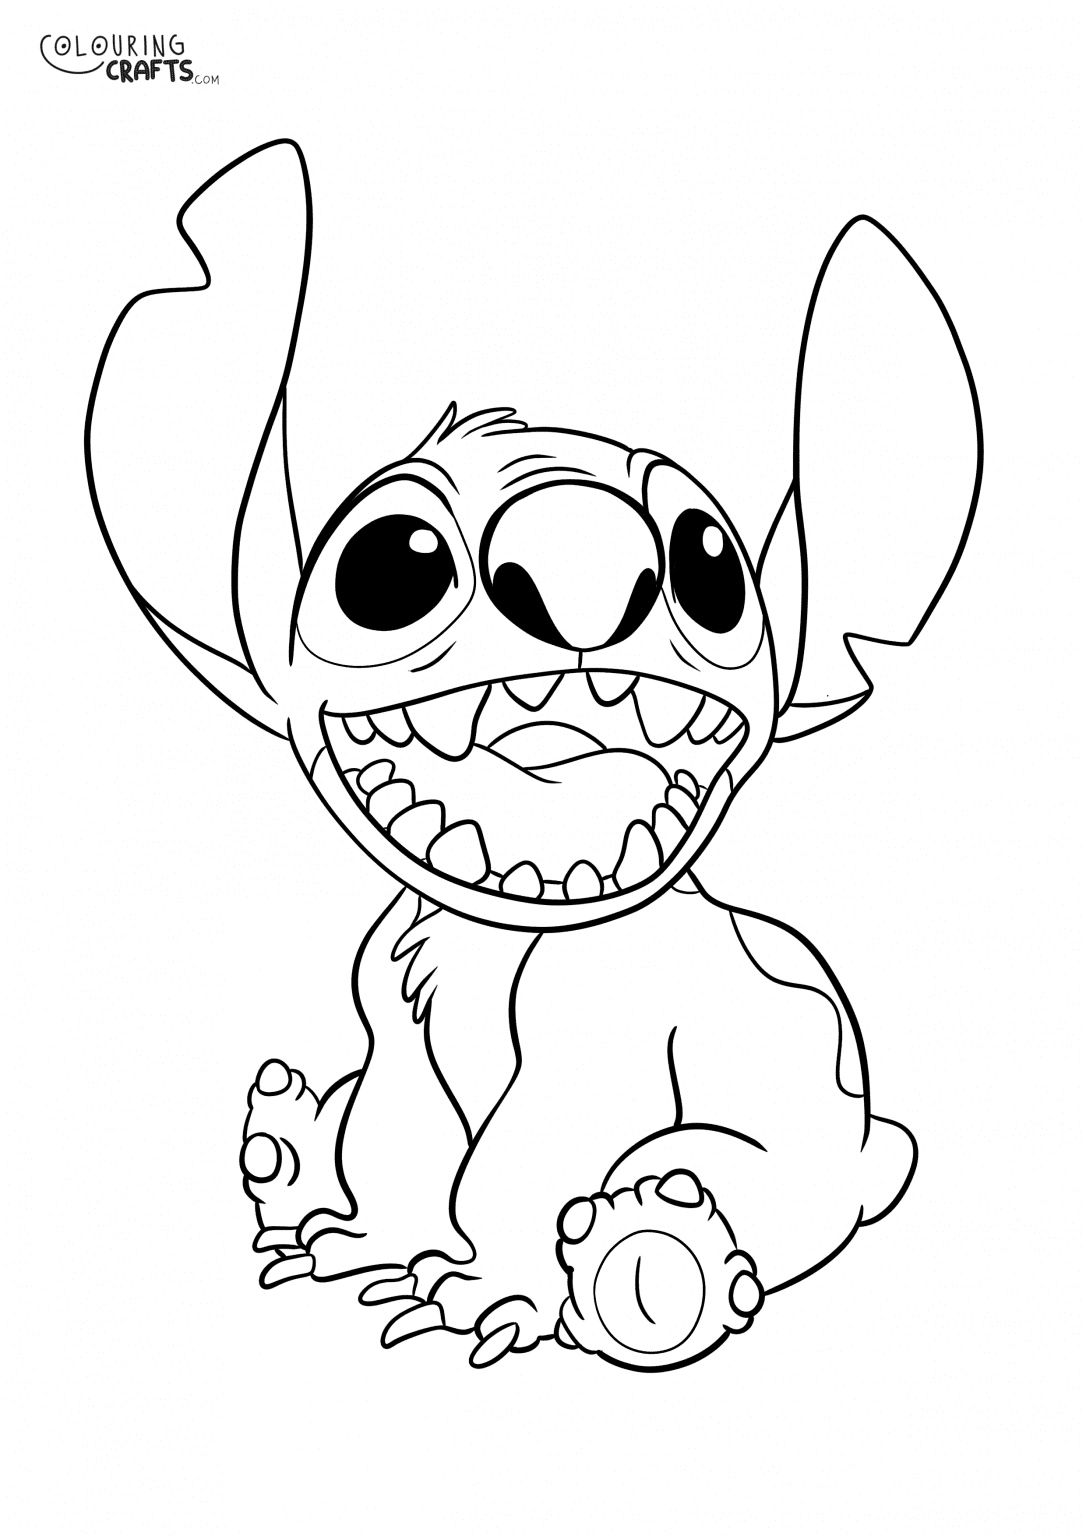 Stitch Colouring Page - Colouring Crafts